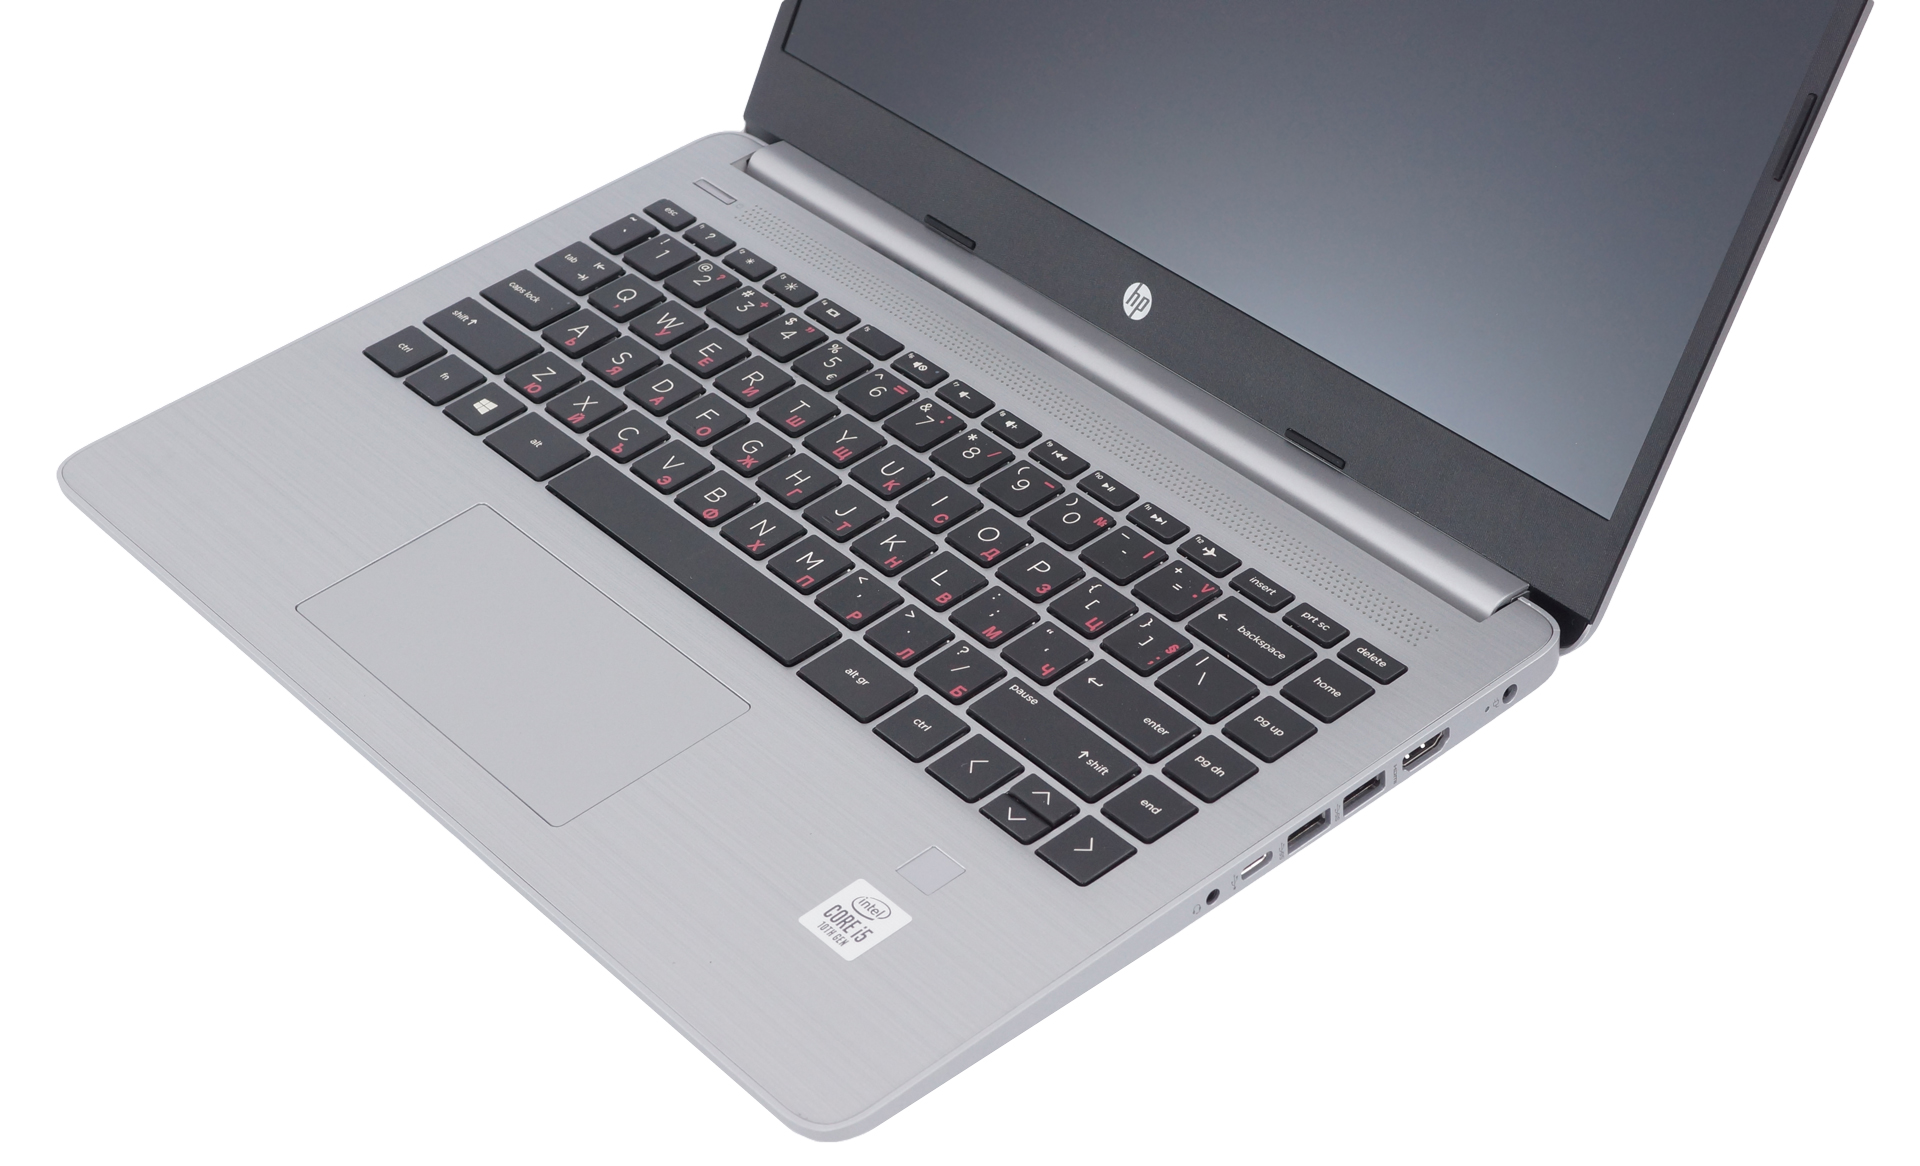 HP 340S G7 review - the affordable business solution | LaptopMedia.com